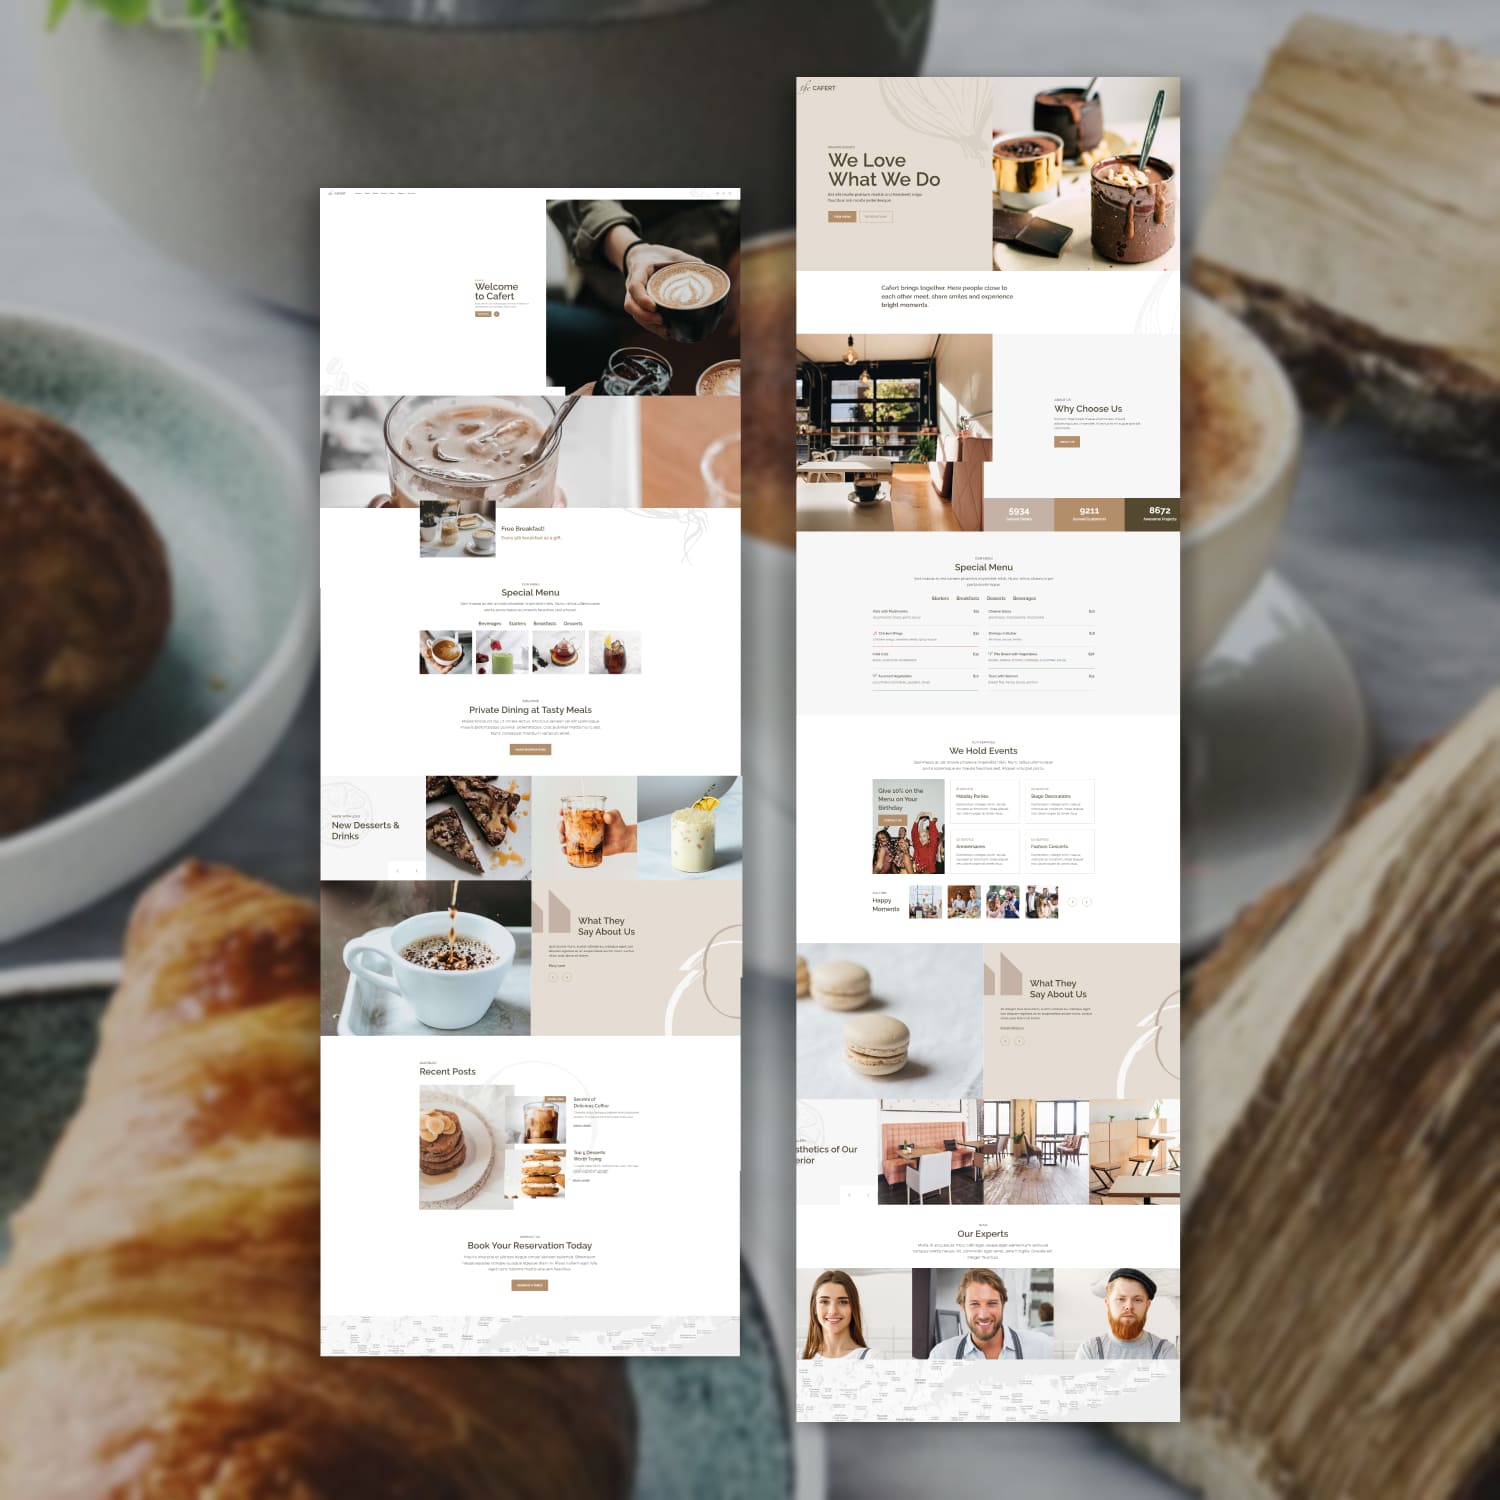 A selection of beautiful pages of the WordPress template on a restaurant theme.